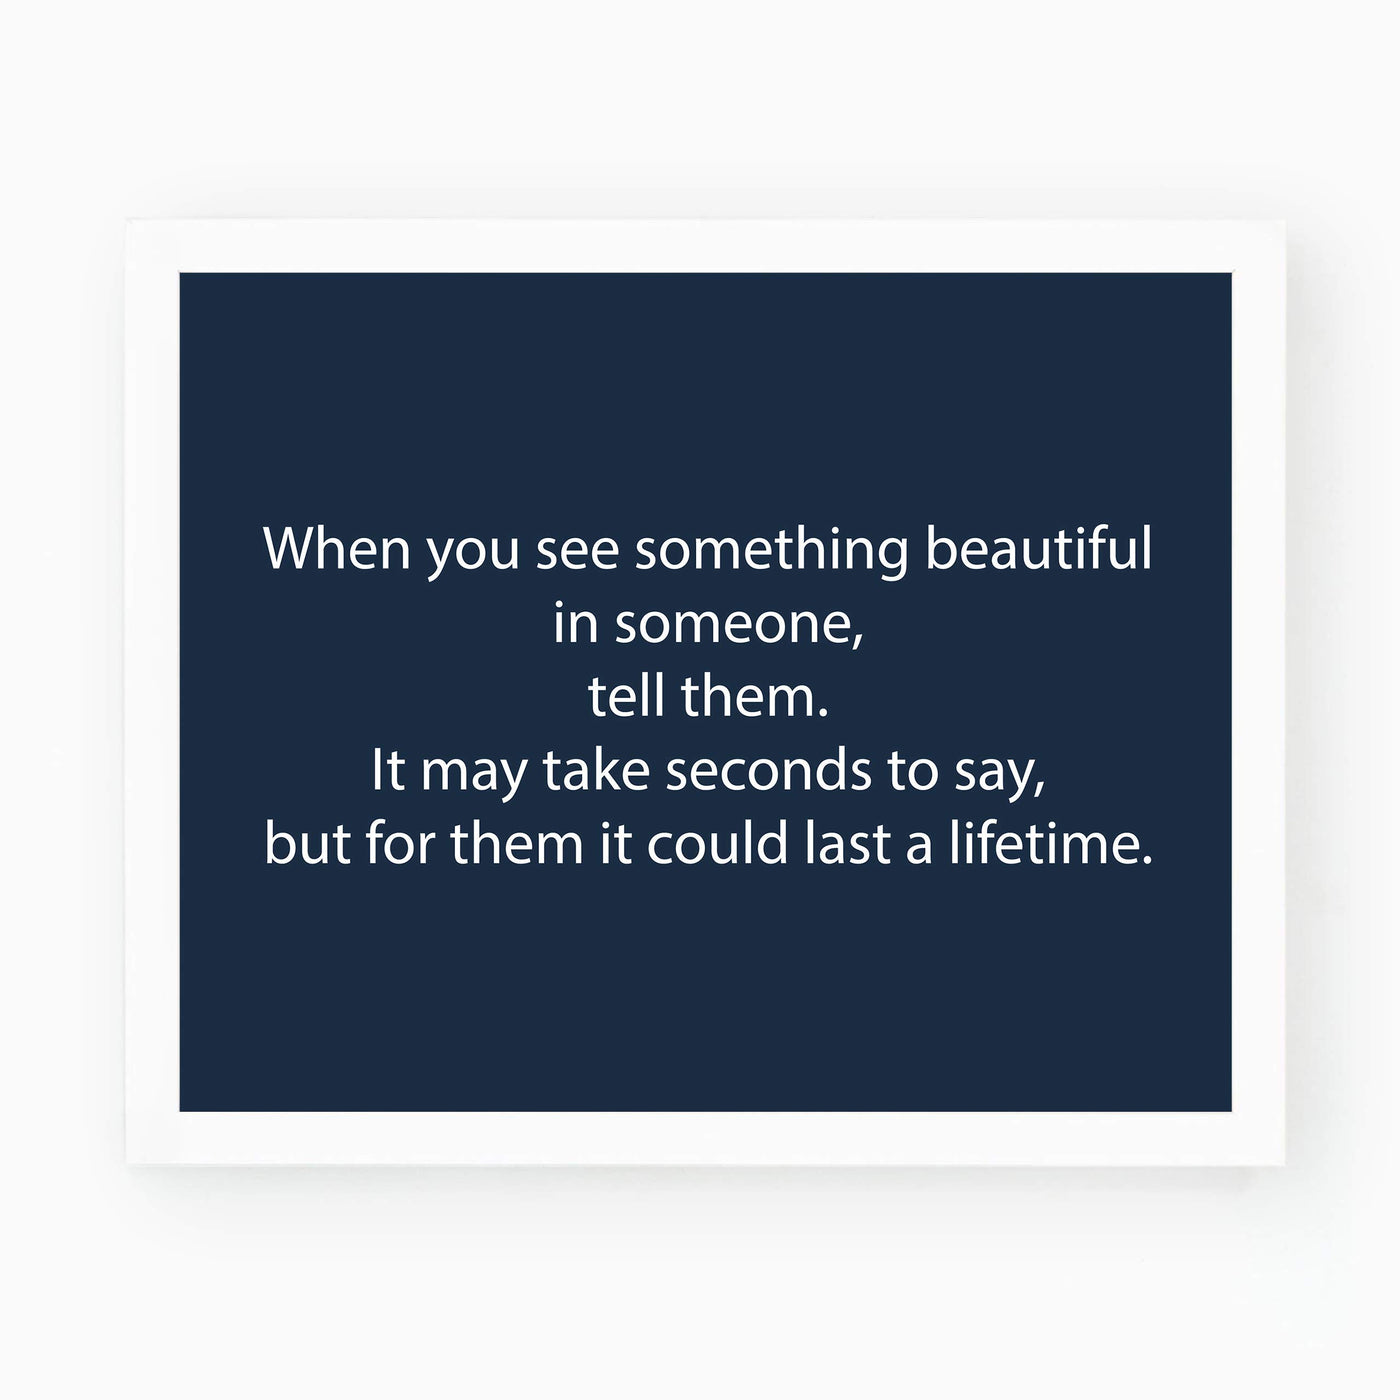 ?When You See Something Beautiful in Someone-Tell Them?-Inspirational Wall Art Sign -10 x 8" Modern Typographic Poster Print-Ready to Frame. Motivational Home-Office-Classroom Decor. Speak Kindness!